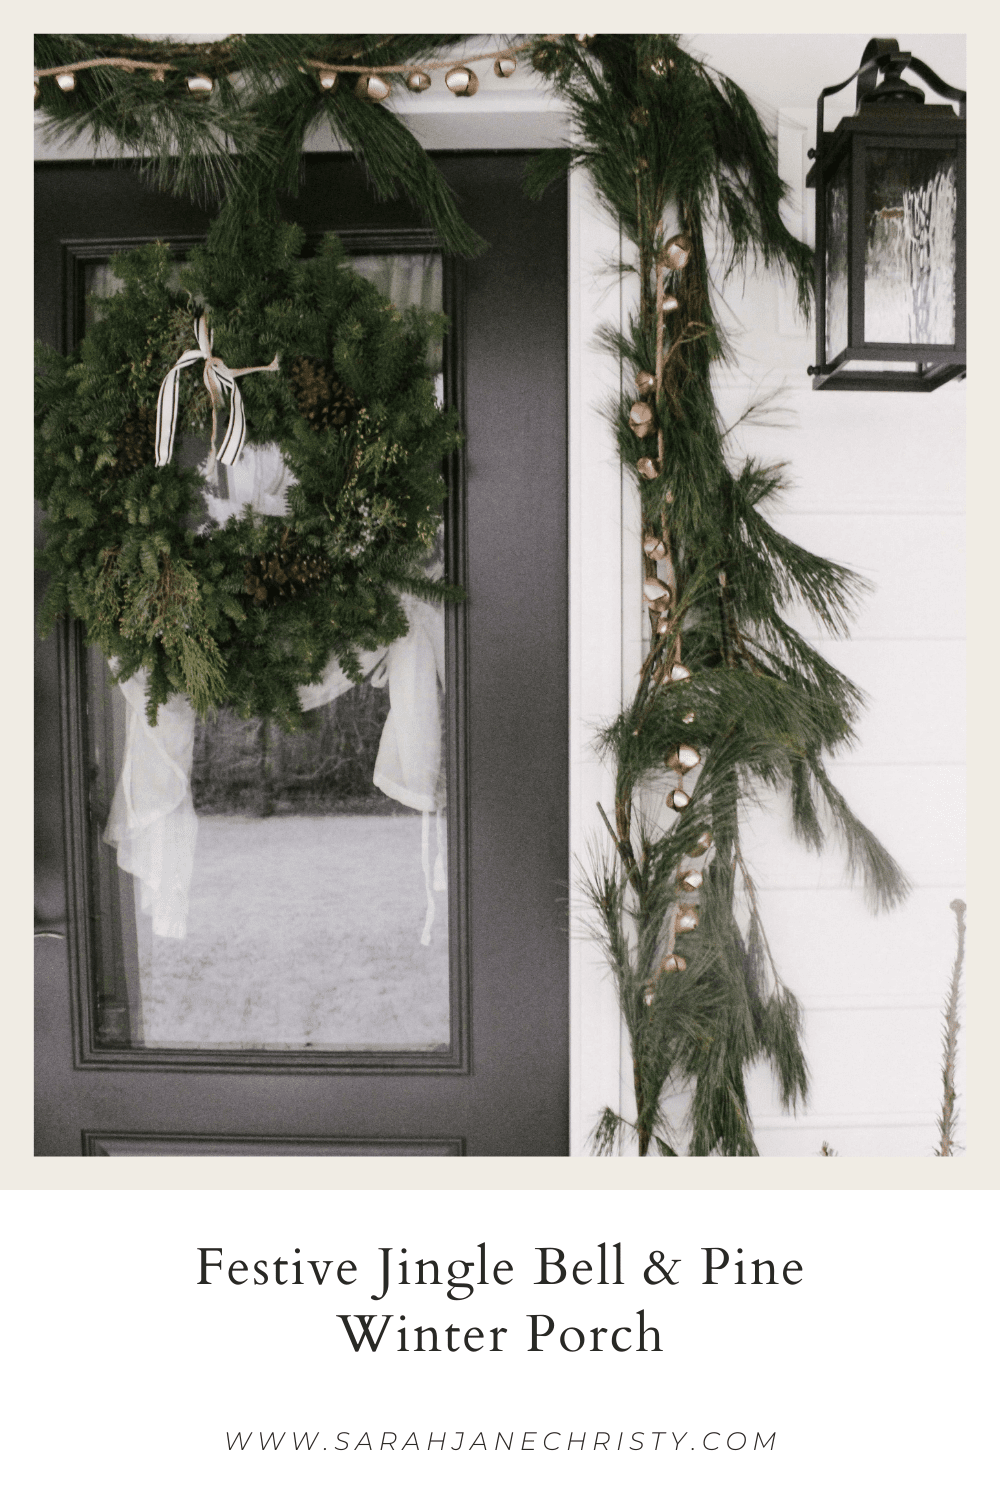 Festive Christmas or Winter Front Porch Decor Using Jingle Bell Garland